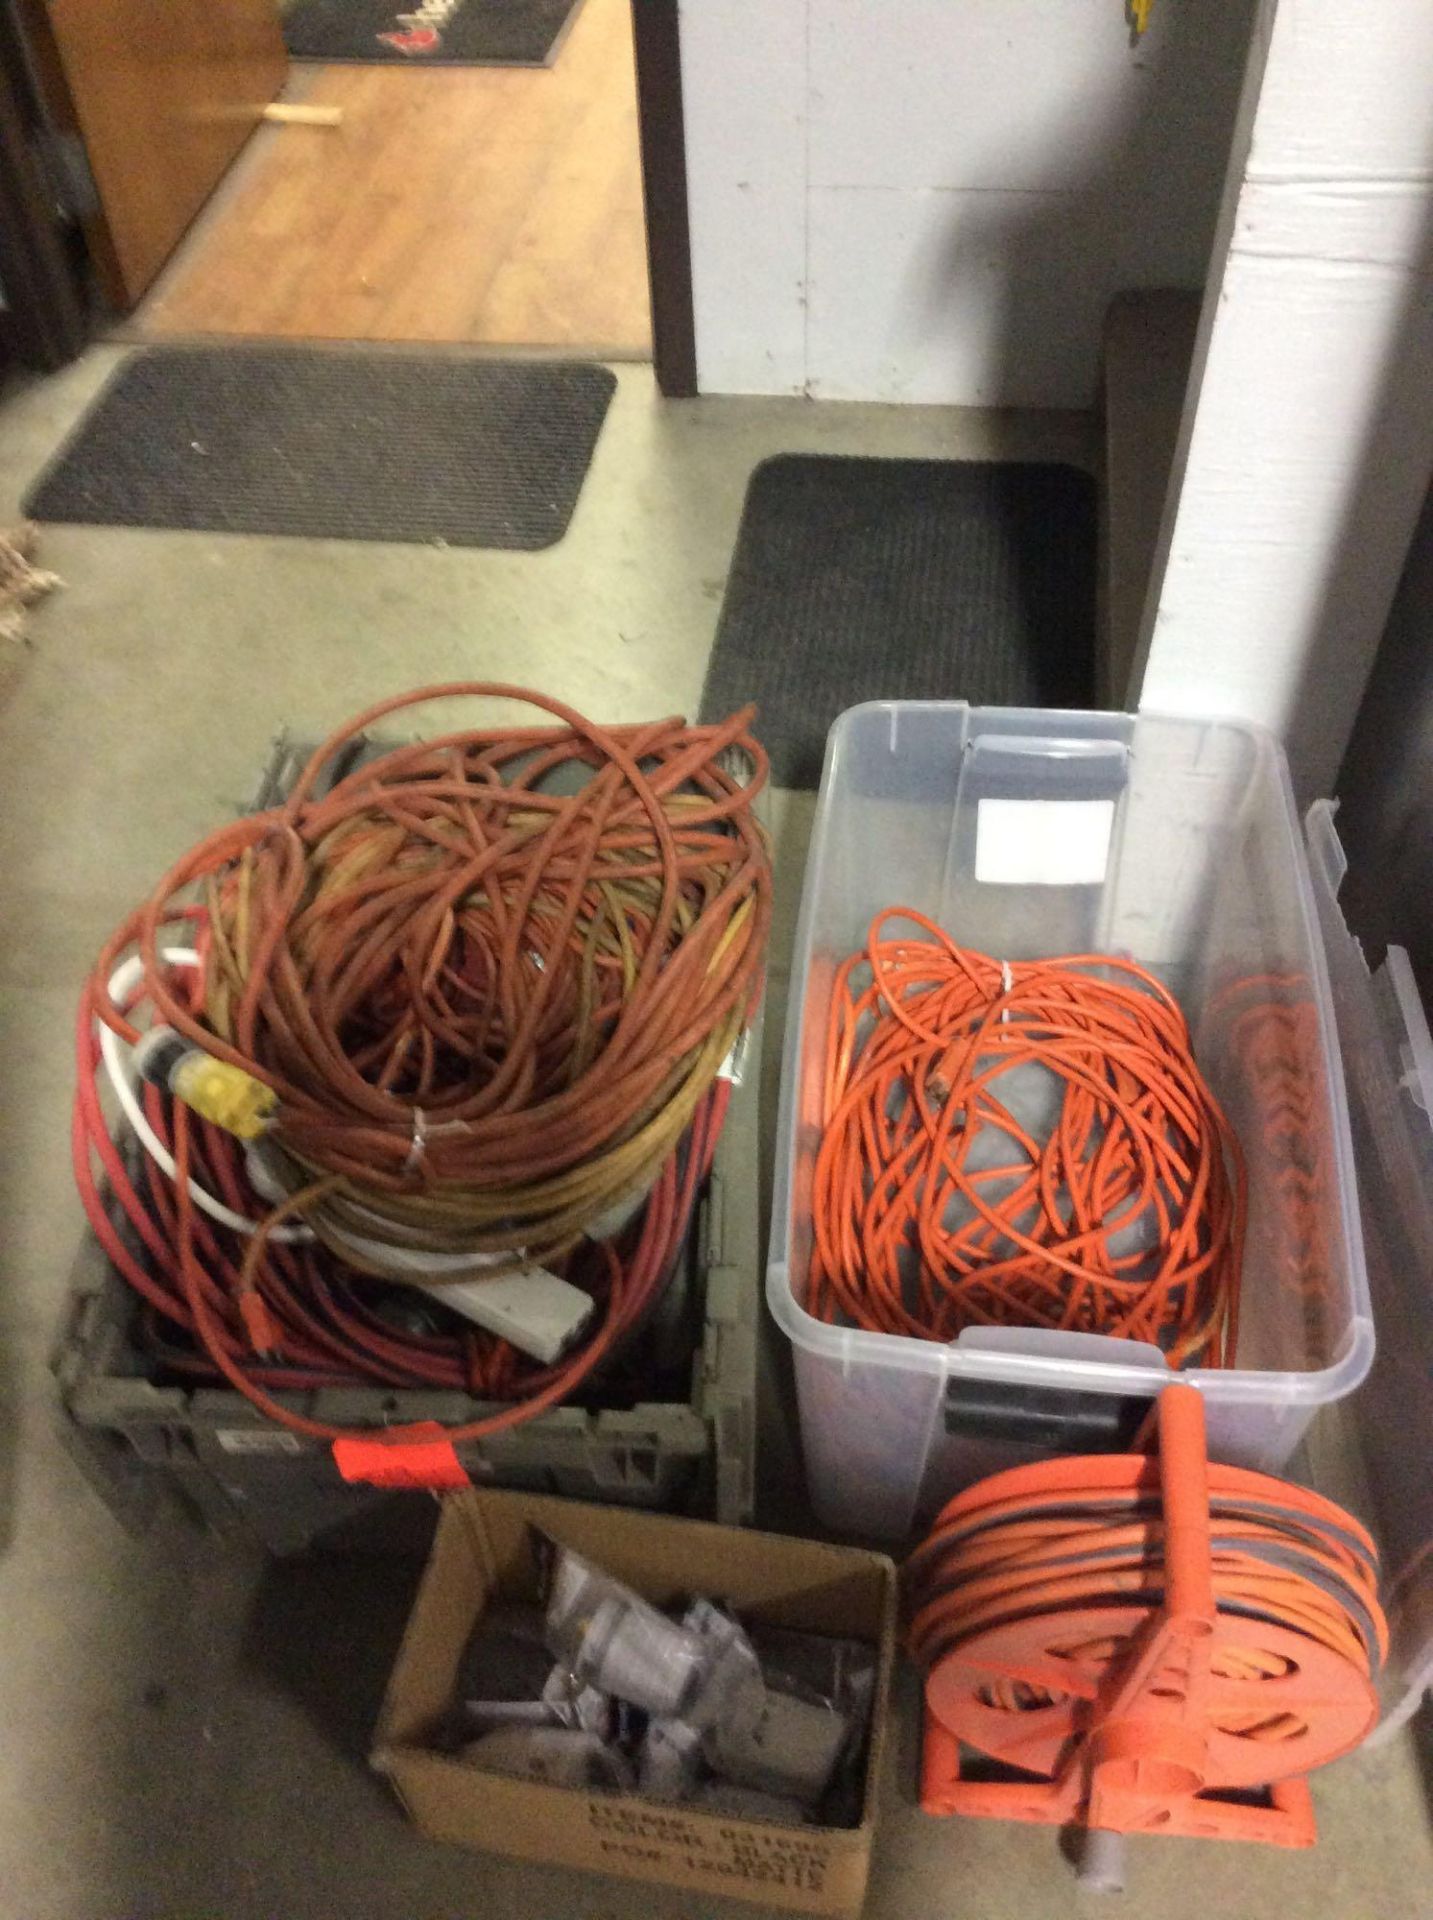 Lot of assorted electrical extension cords, drop cords, wire, fittings etc, with cabinet.